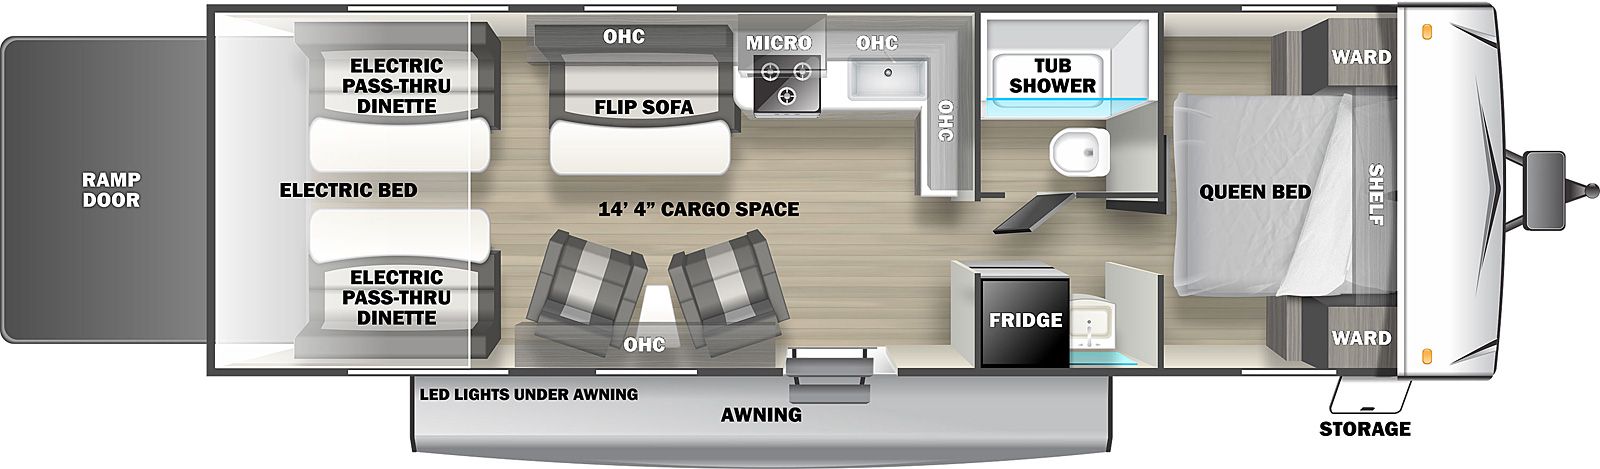 The Stealth FQ2514 is a toy hauler travel trailer that has a single entry door, rear ramp door, front storage, and 16' awning on the exterior. Inside, the front of the unit contains a walkaround queen bed with wardrobe cabinets on either side and a shelf mounted overhead. The bedroom door opens to a short hallway that leads to the living area. On the door side of the hallway is a refrigerator and bathroom sink. On the off-door side is the bathroom containing a tub shower and commode. The kitchen is located just outside the bathroom with an L-shaped countertop, sink, cooktop with oven, and overhead cabinets and microwave oven. Next to the kitchen on the off door side is a flip sofa with half dinette table and overhead cabinets. On the door side wall are additional overhead cabinets with a pair of upholstered chairs and small table located underneath. In the rear, there is a pair of flip sofa benches, one on each side, with a split dinette table between them. This converts to a standard electric bed. There is 14' 4" of interior cargo space in this unit.